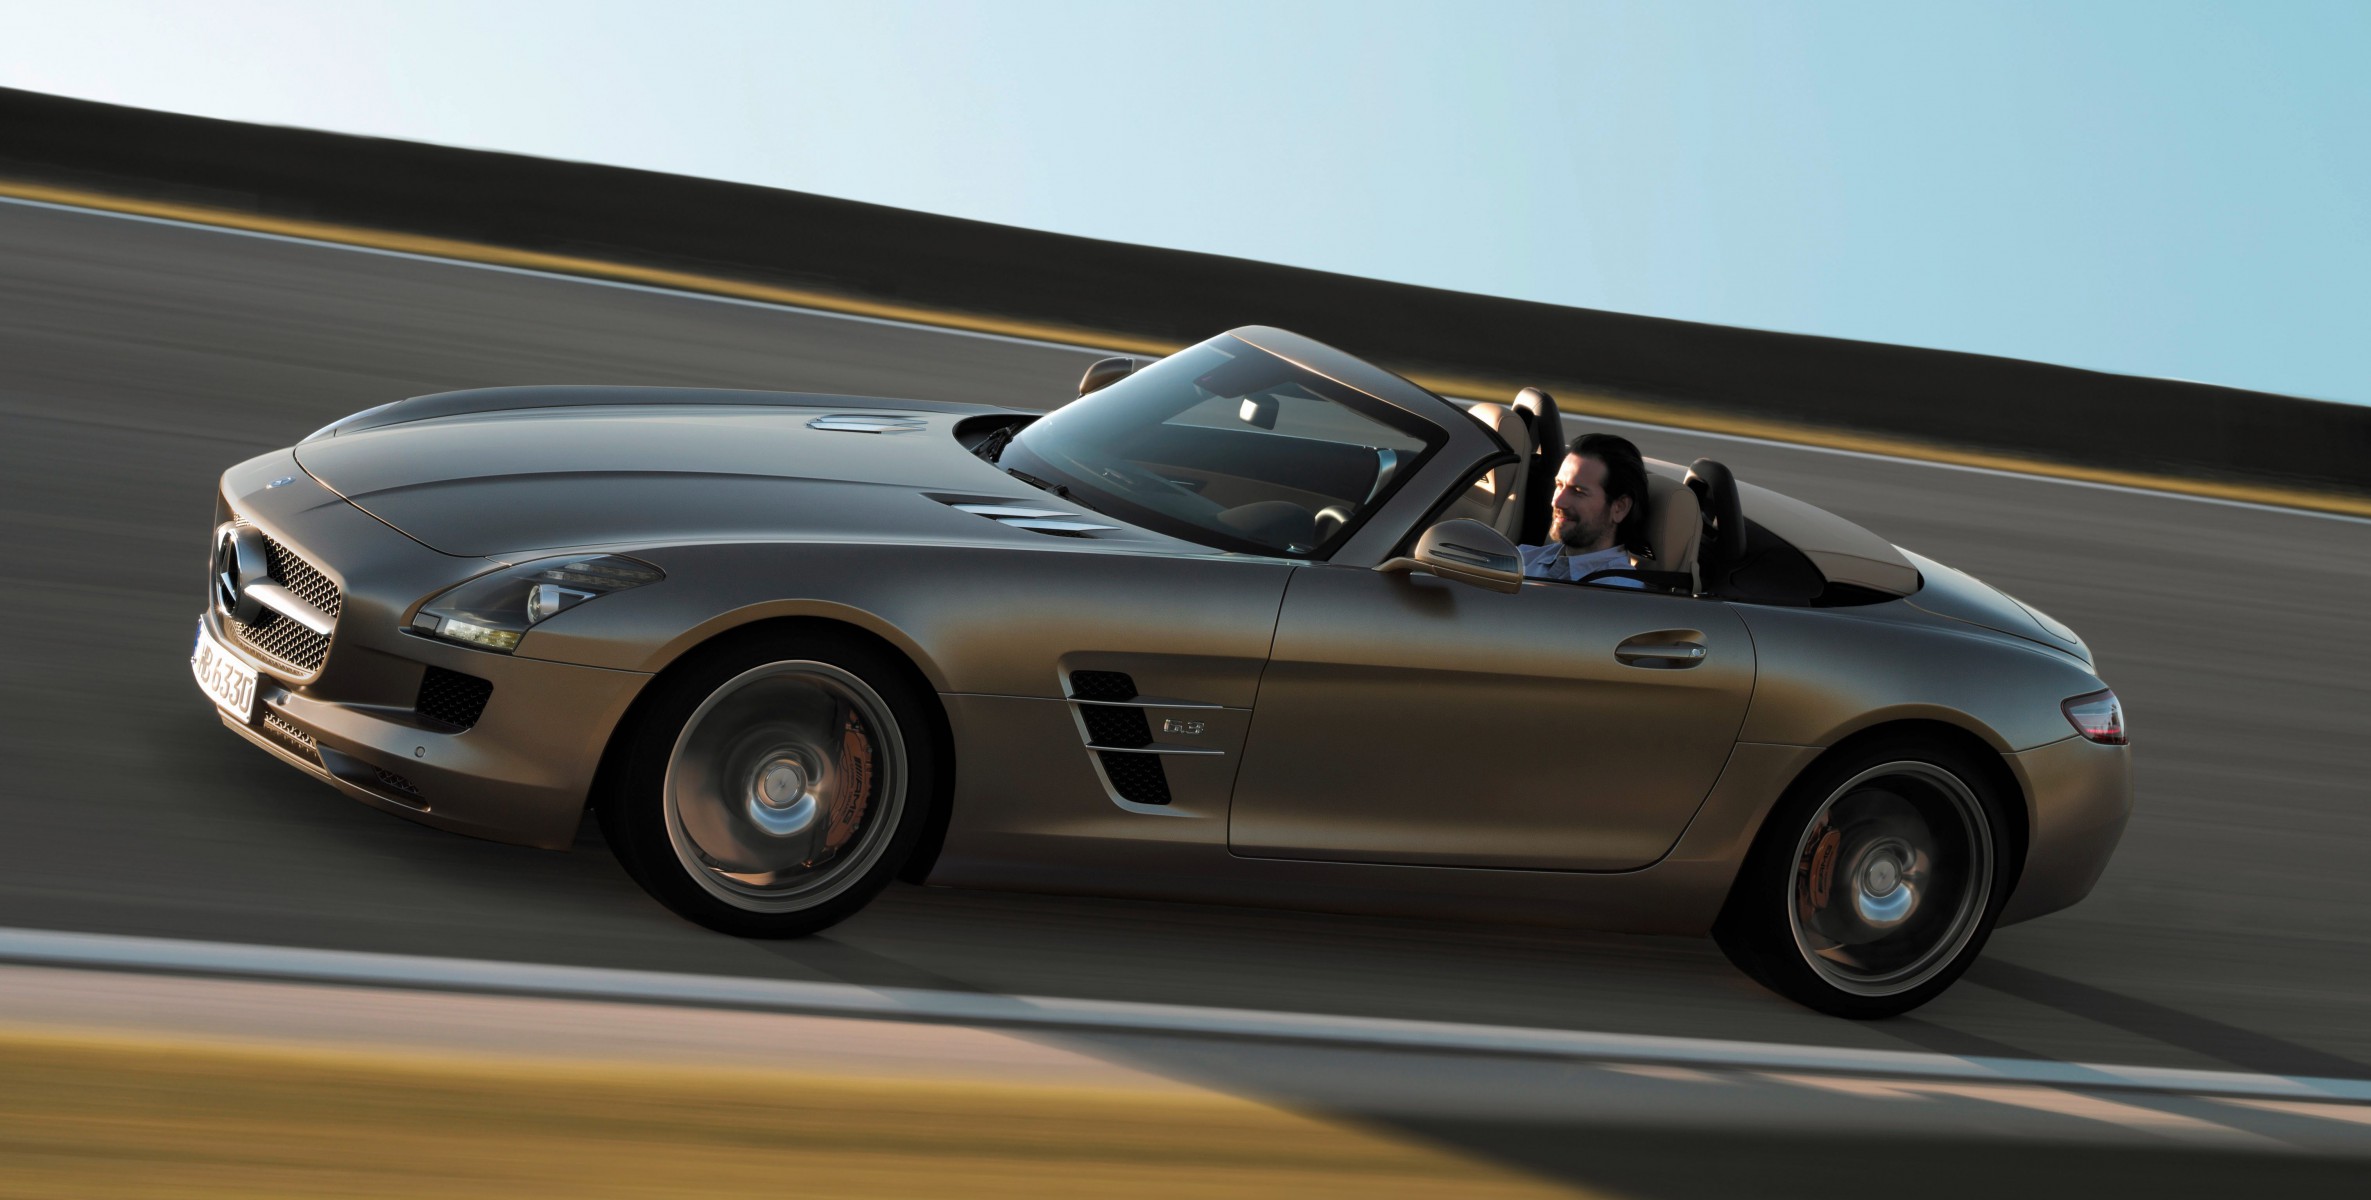 The Mercedes-Benz SLS AMG Roadster has a 6.3-liter V8 engine that pushes out 571 horsepower